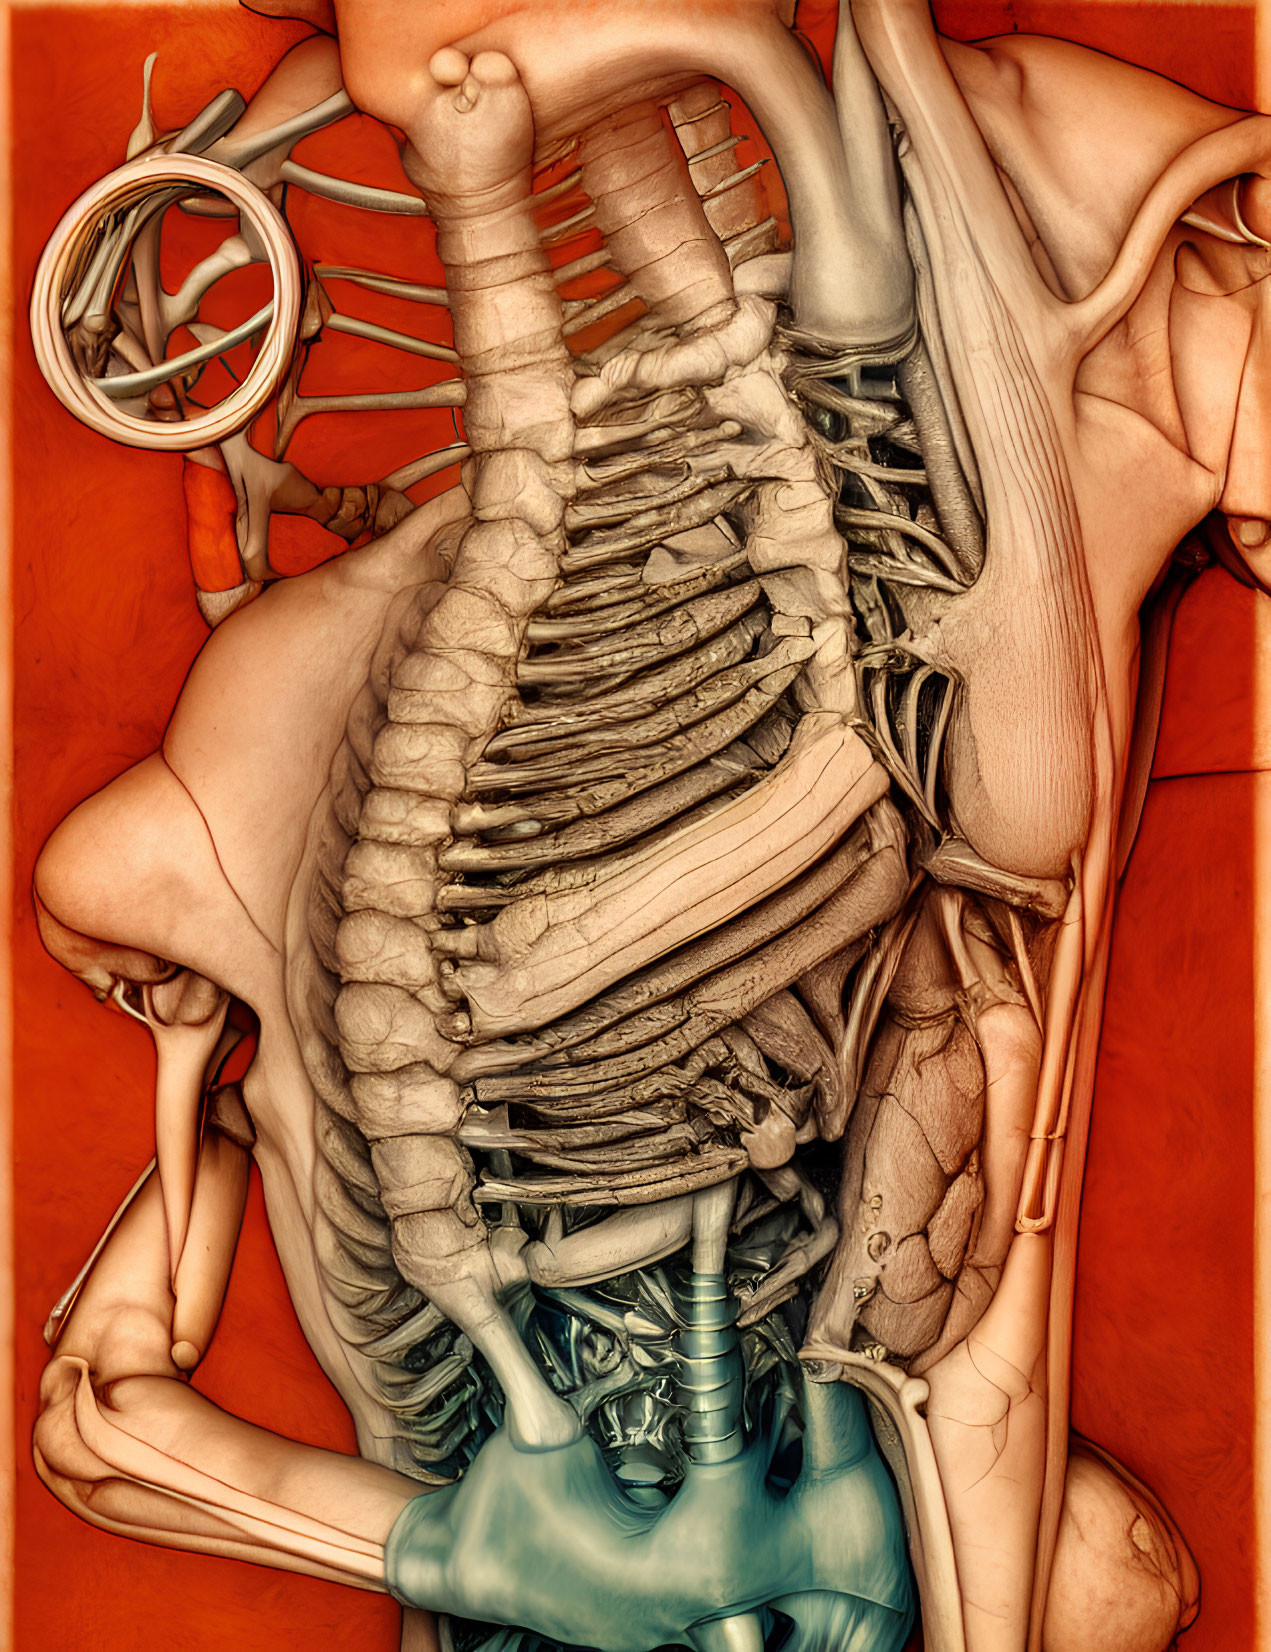 Anatomical illustration of human rib cage, spine, and digestive system